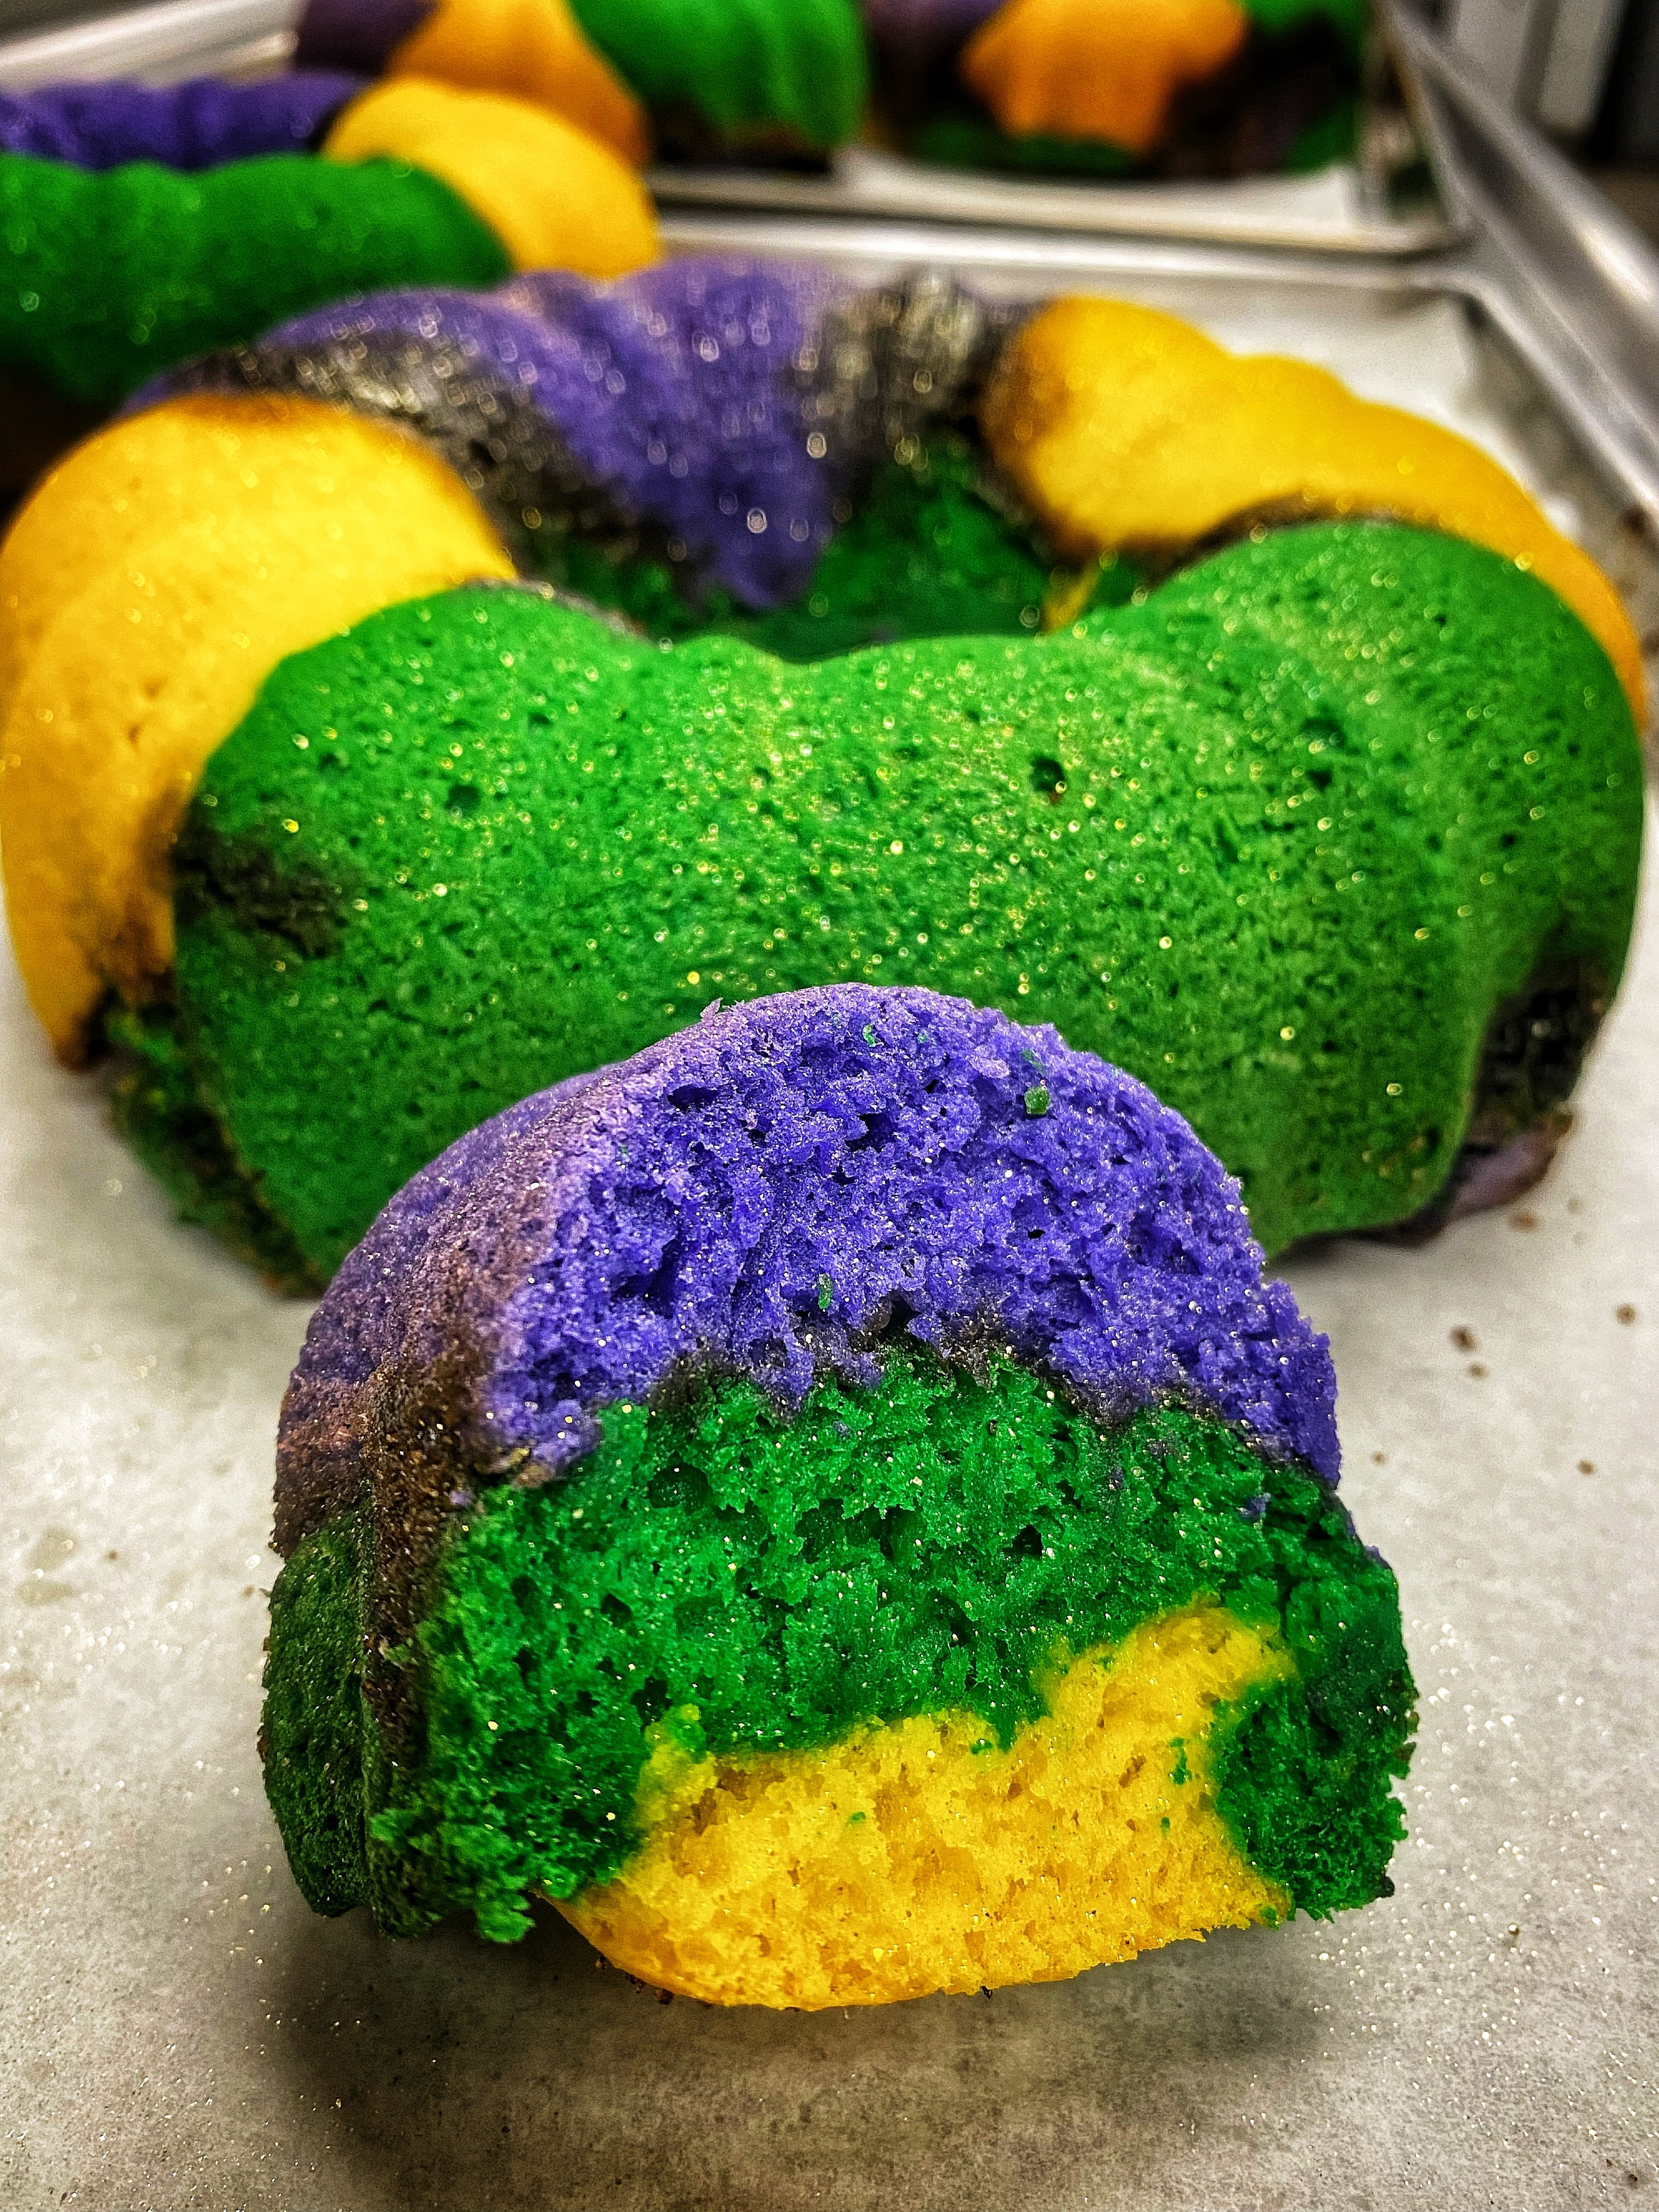 Gluten-free, dairy-free king cake from Cake Cafe and NOCCA's Culinary Arts department